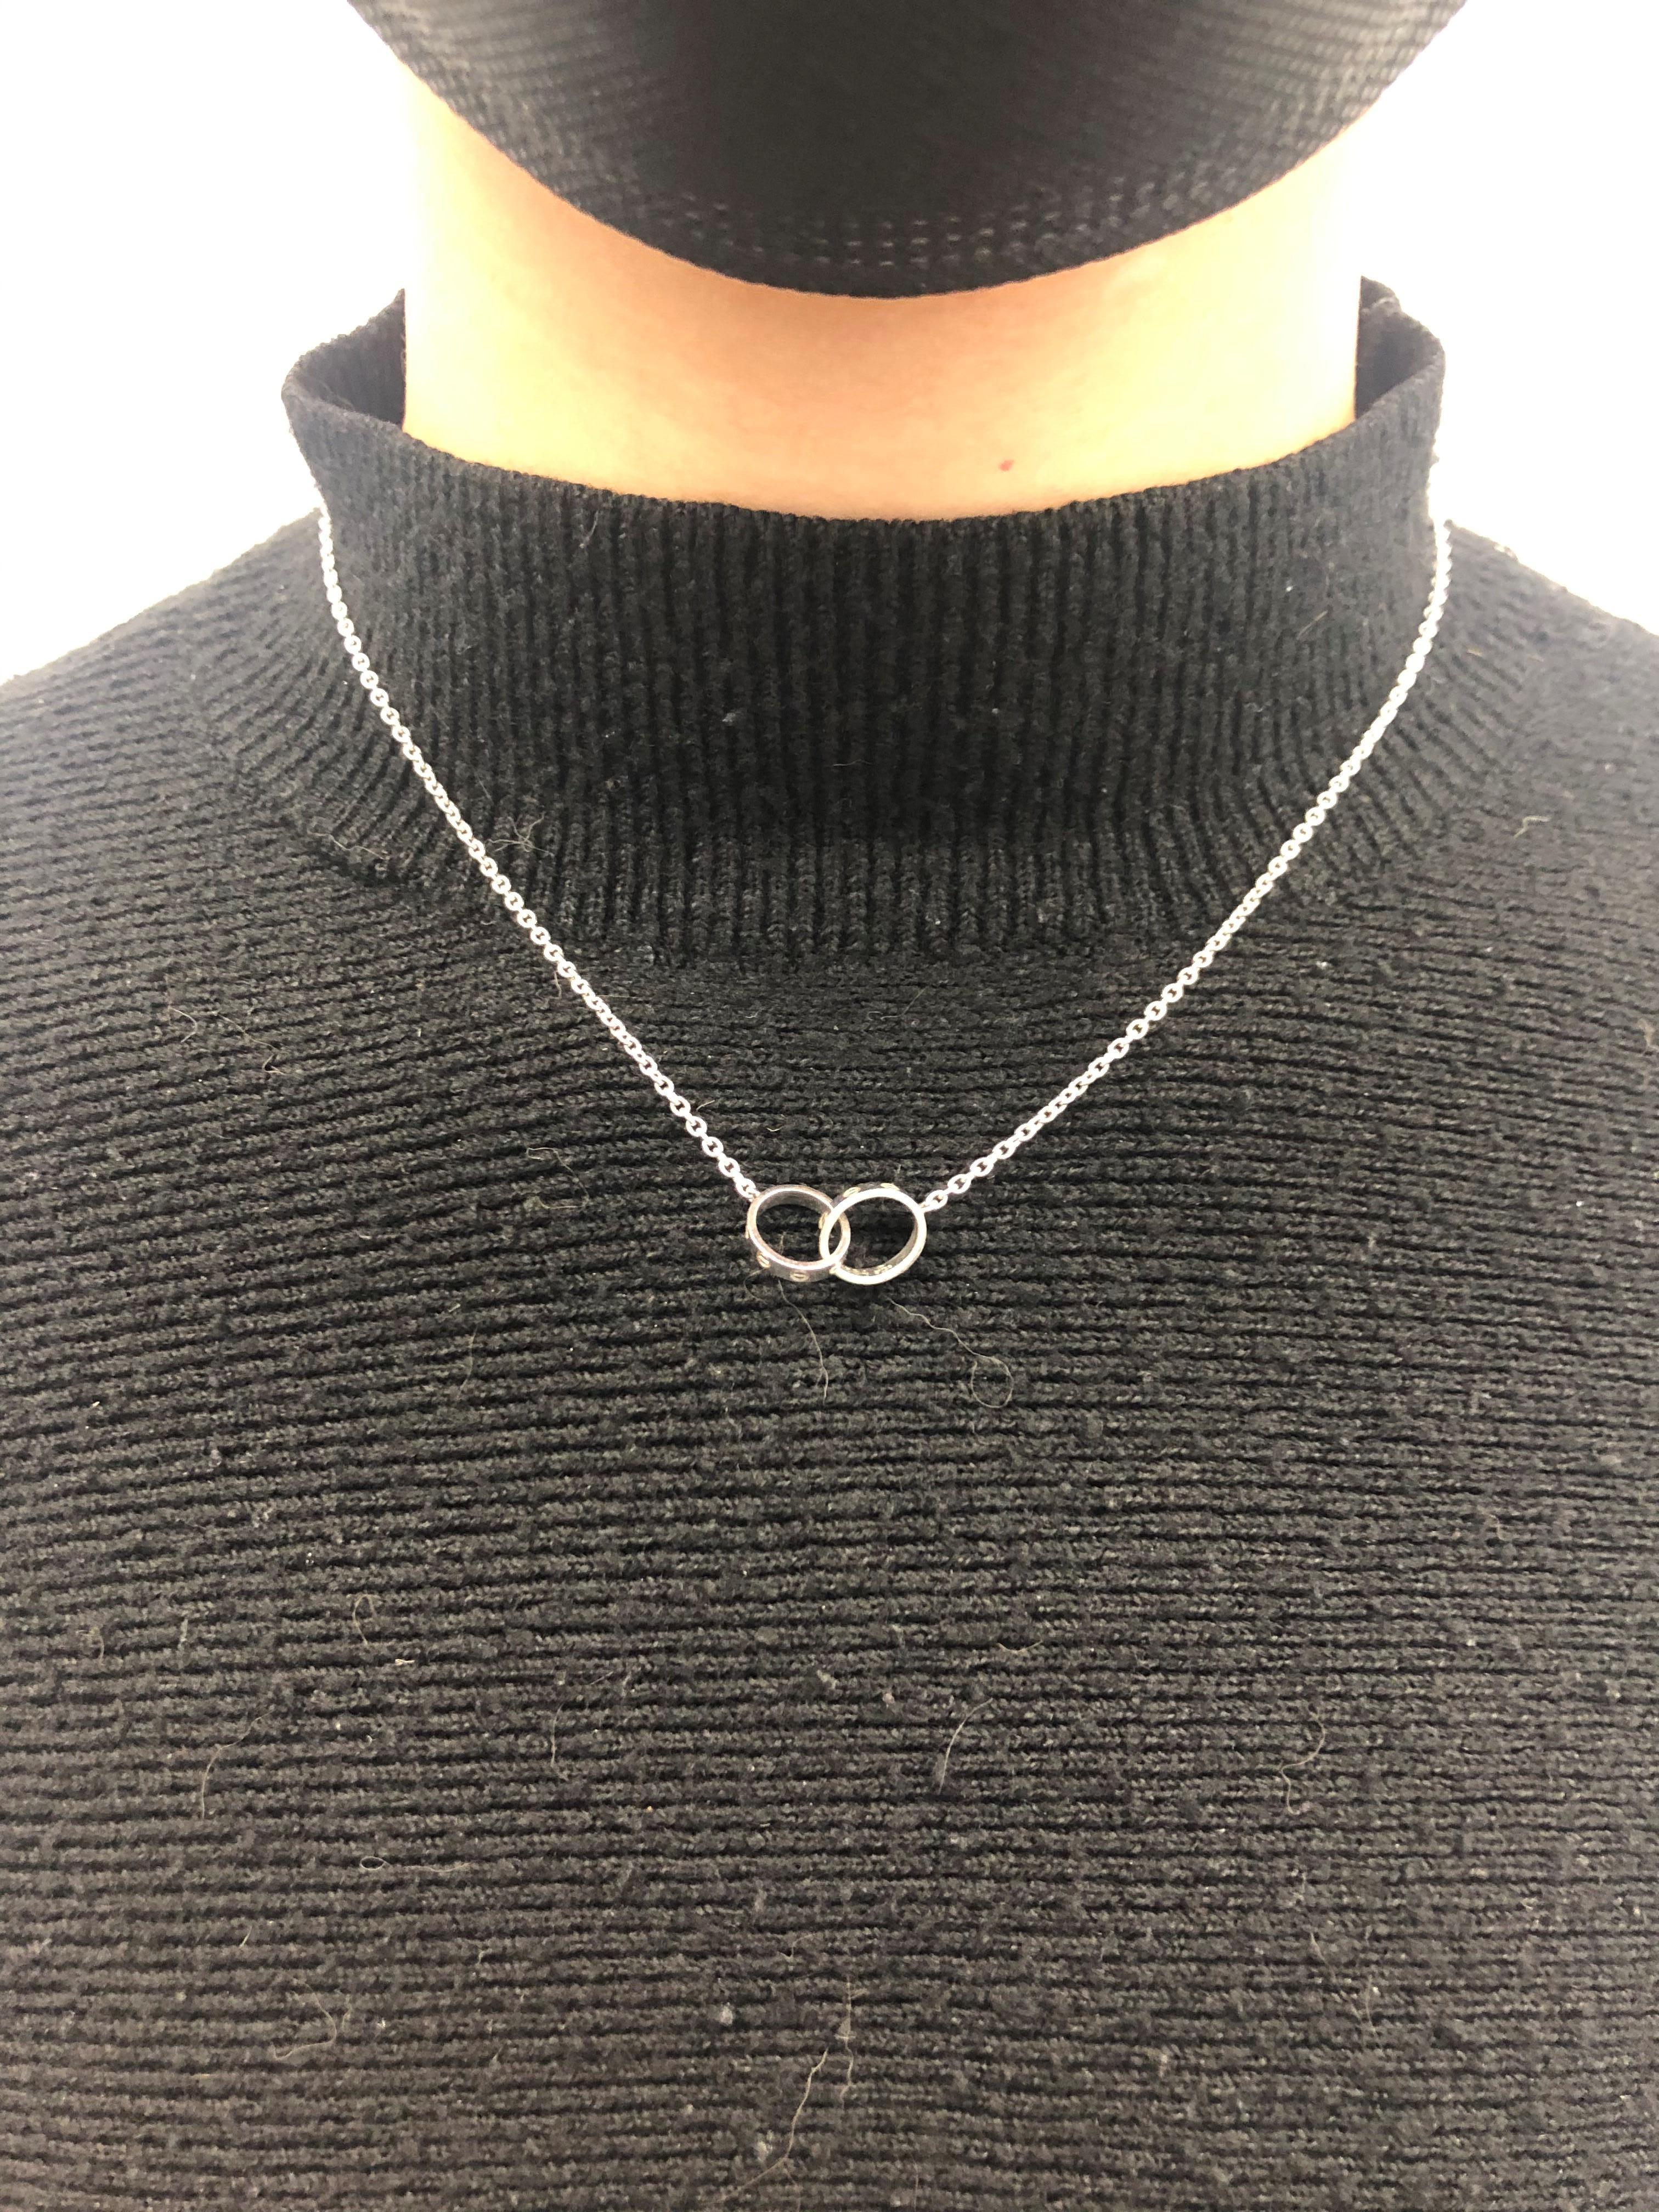 Contemporary Cartier Love Necklace in 18 Karat White Gold